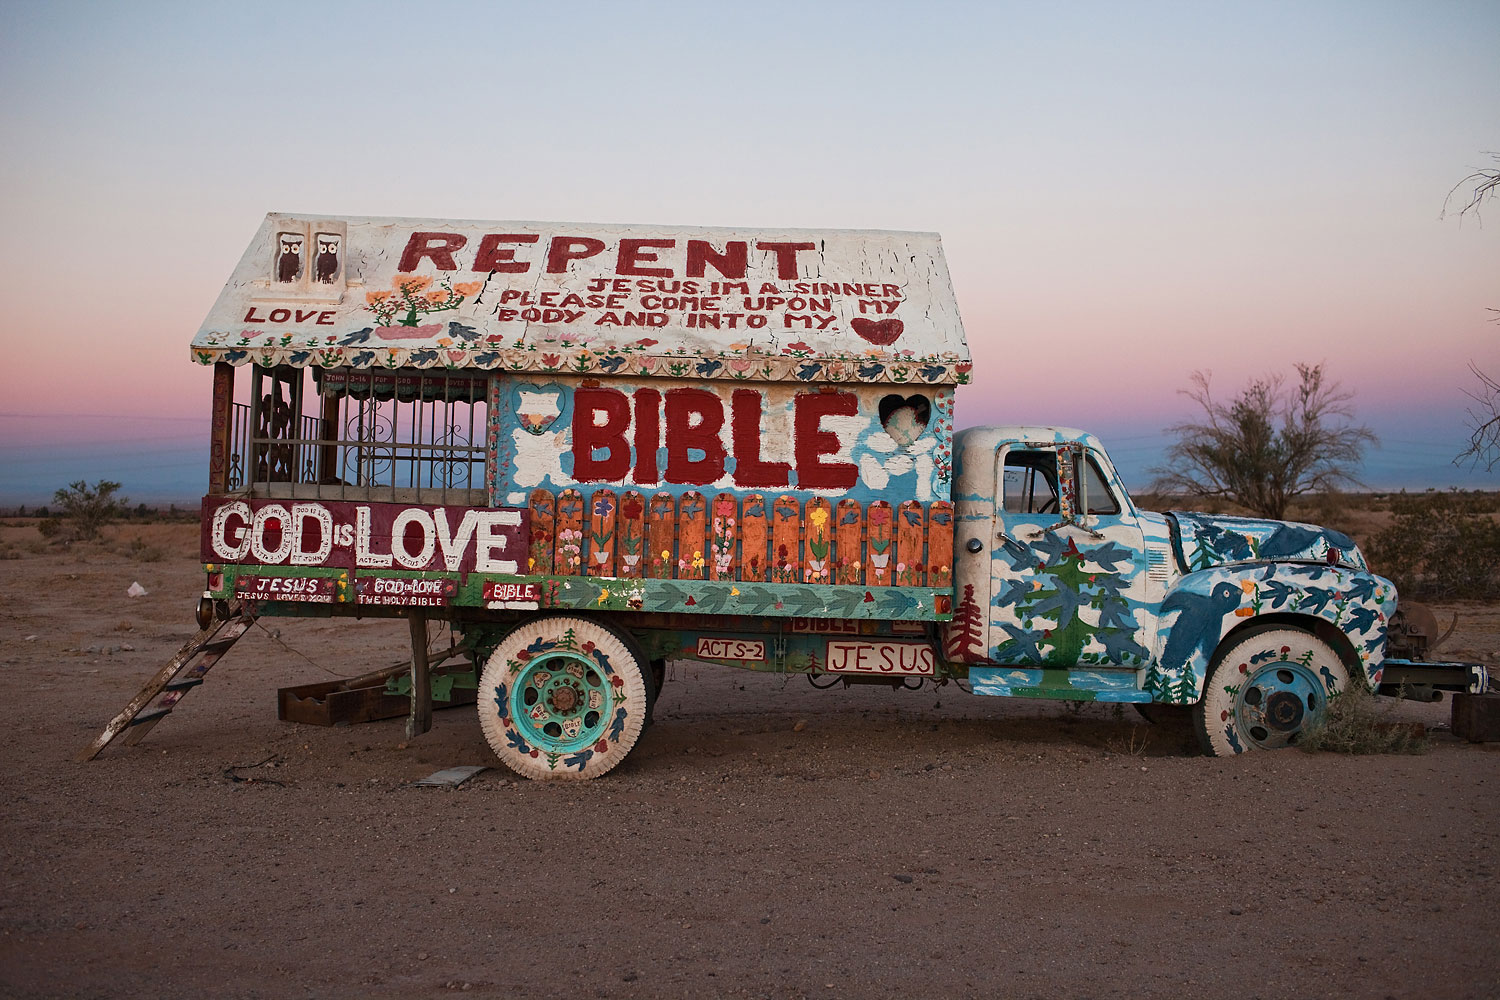 One of Knight's many art cars covered in scripture. He used to drive them in parades in the valley.